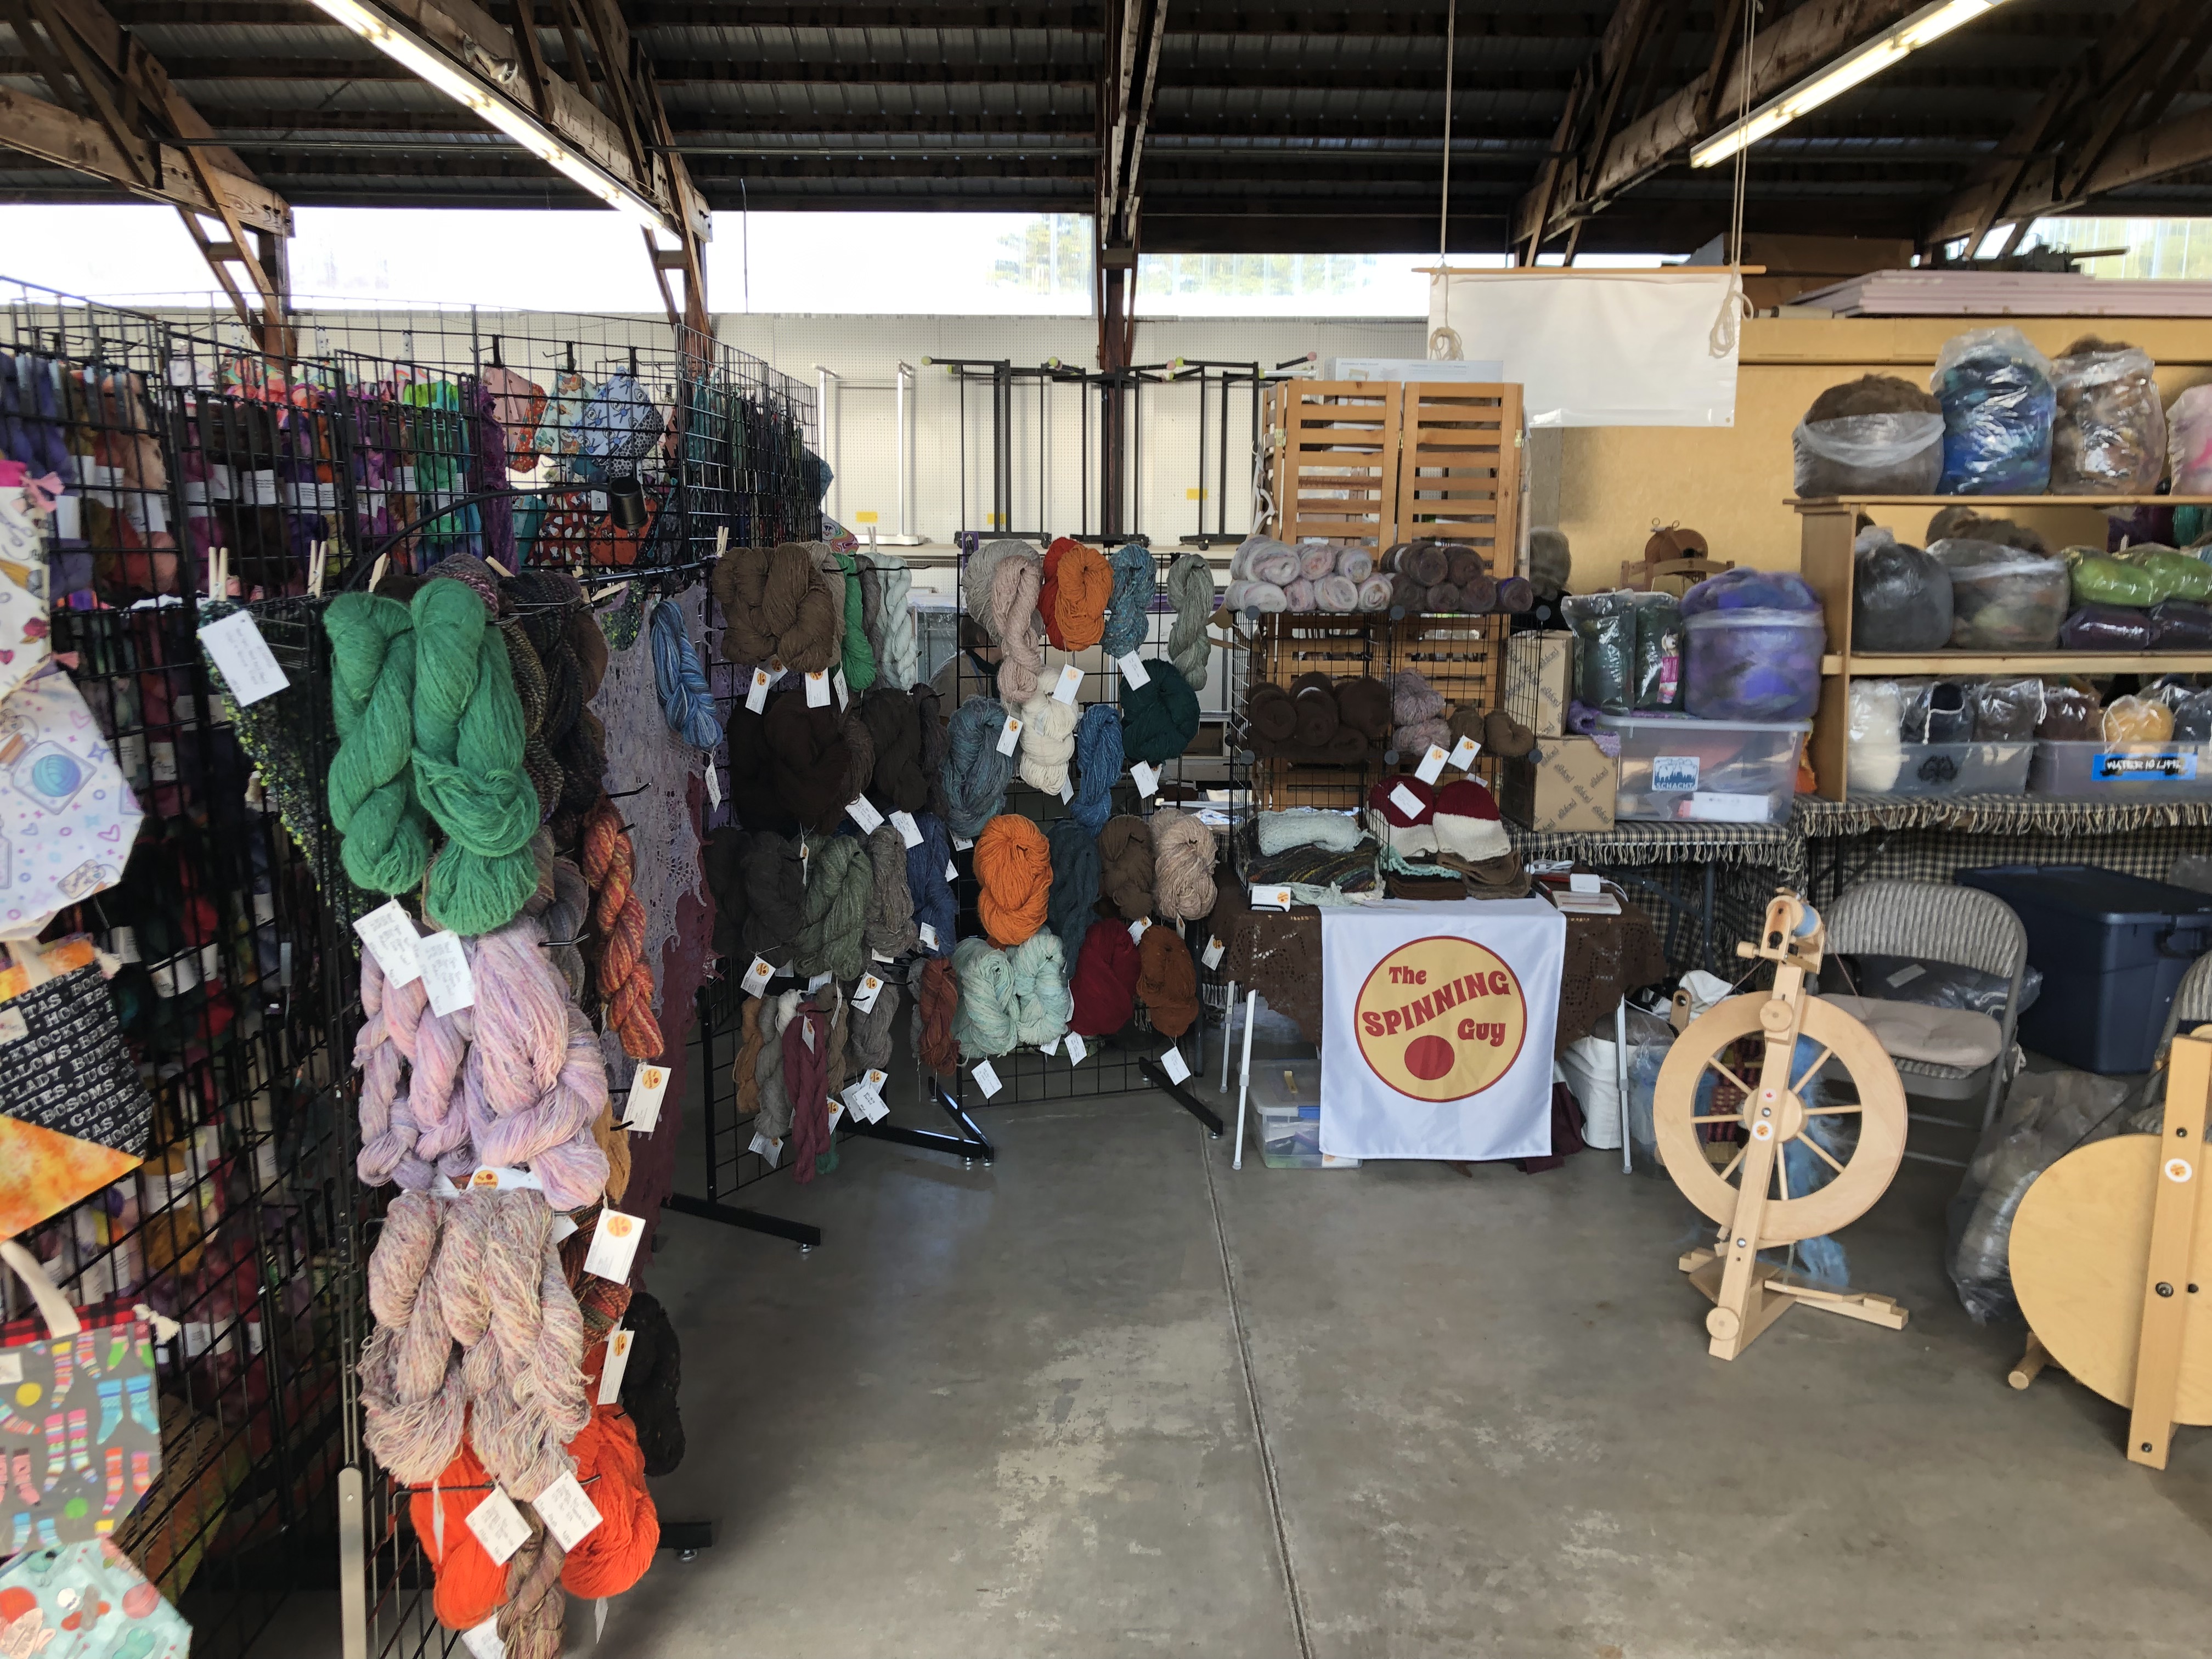 The Spinning Guy Booth at Shepherds Harvest 2022